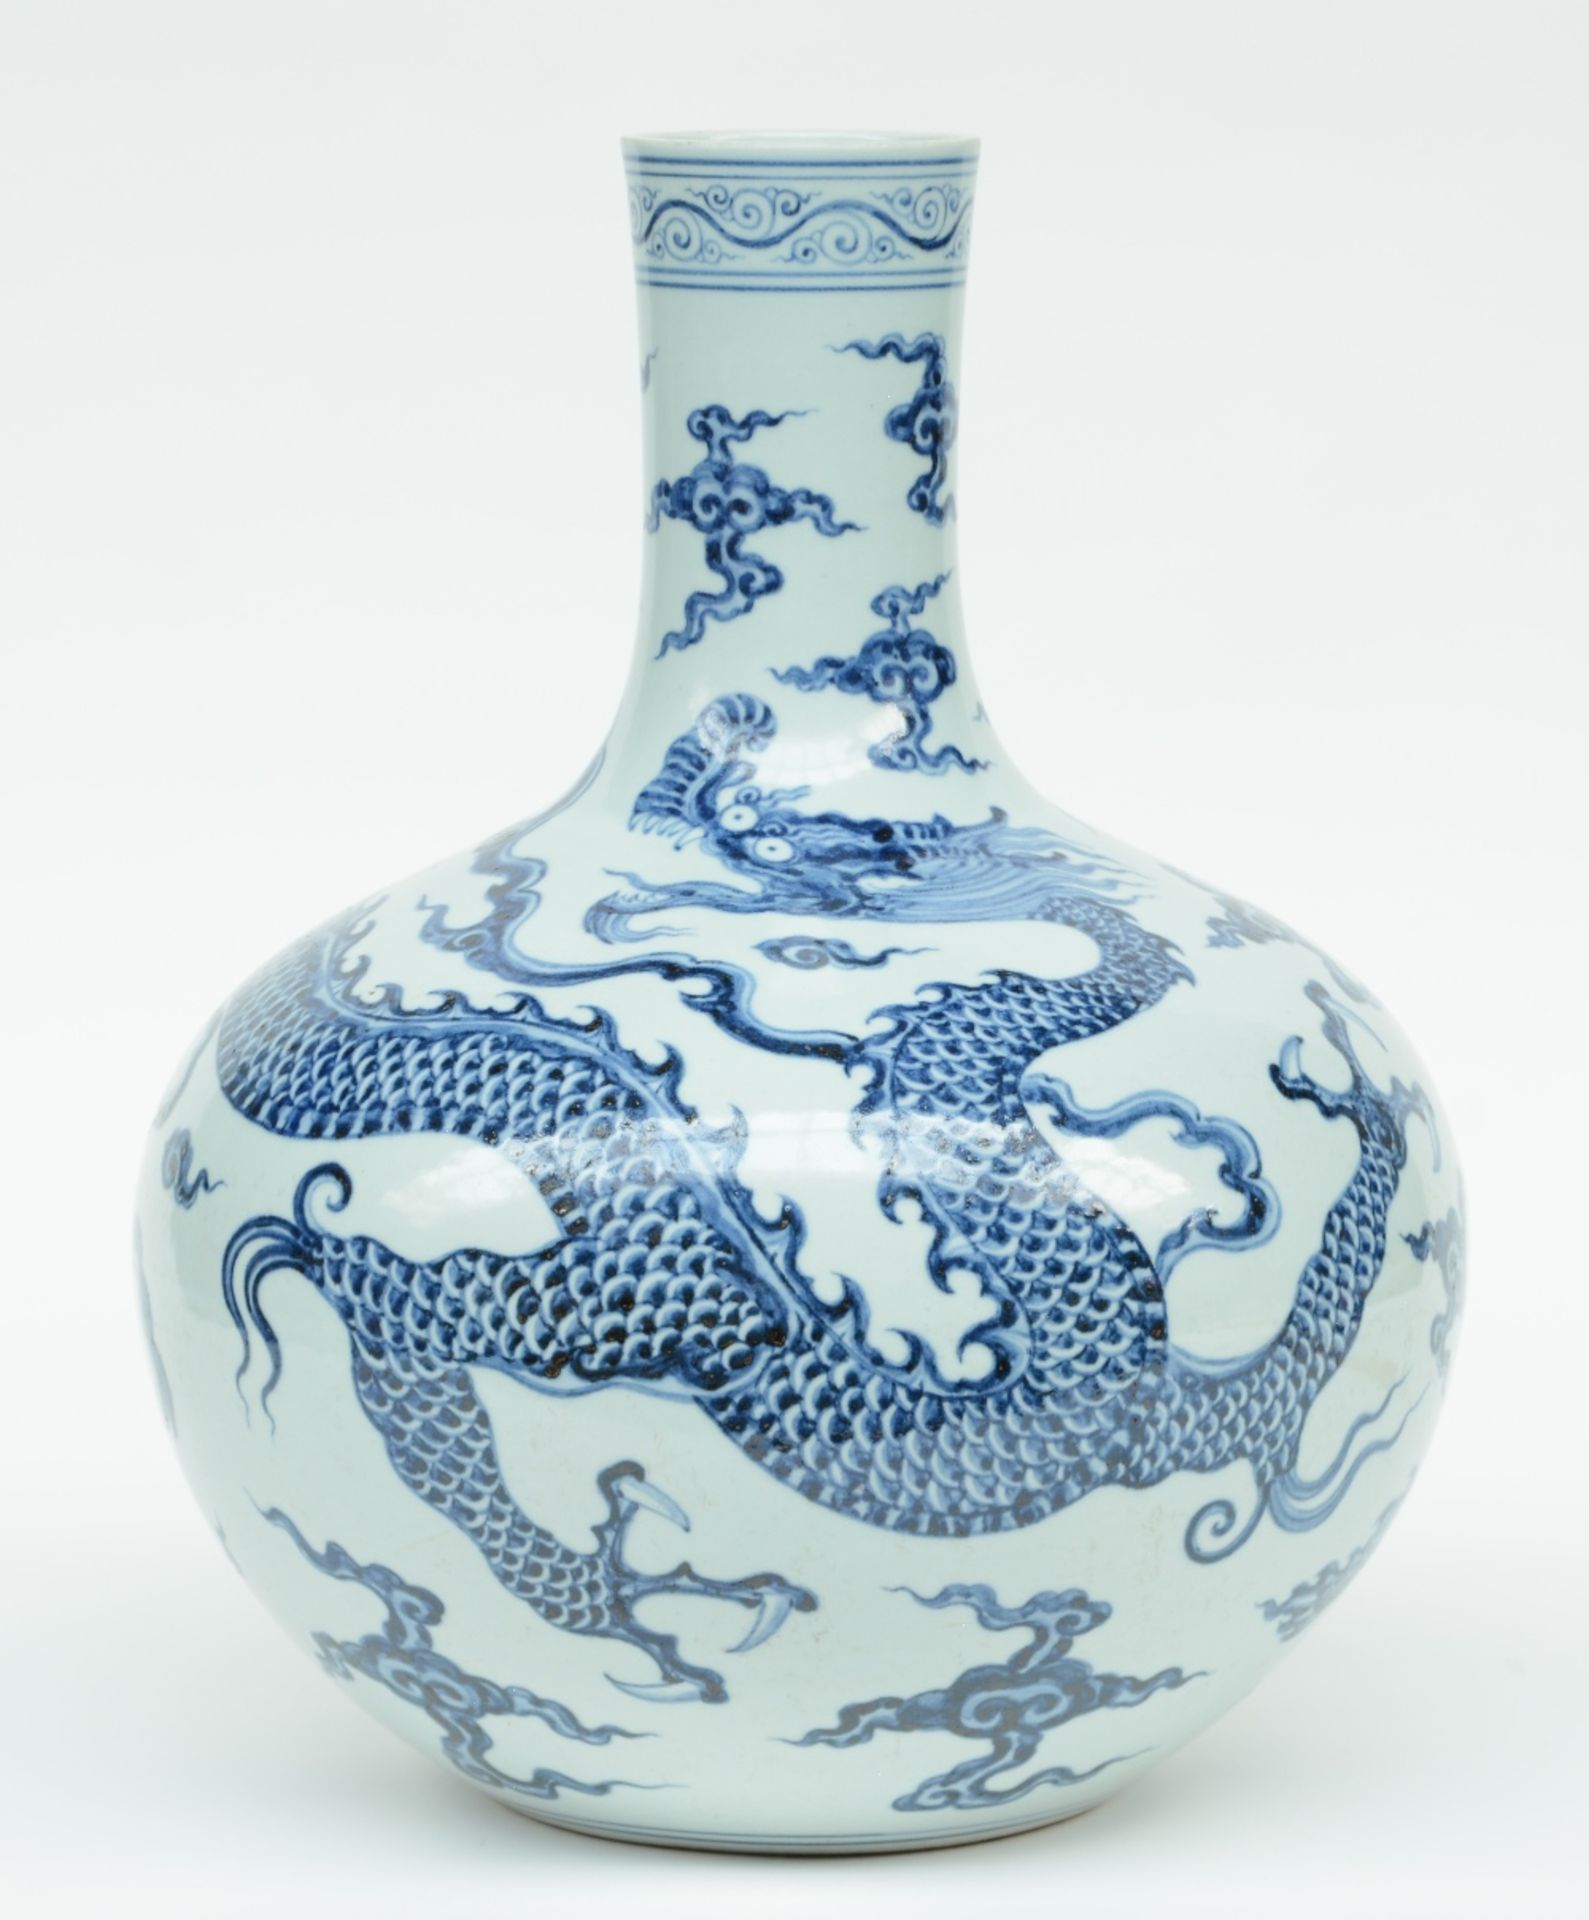 A Chinese blue and white dragon bottle vase, H 44 cm